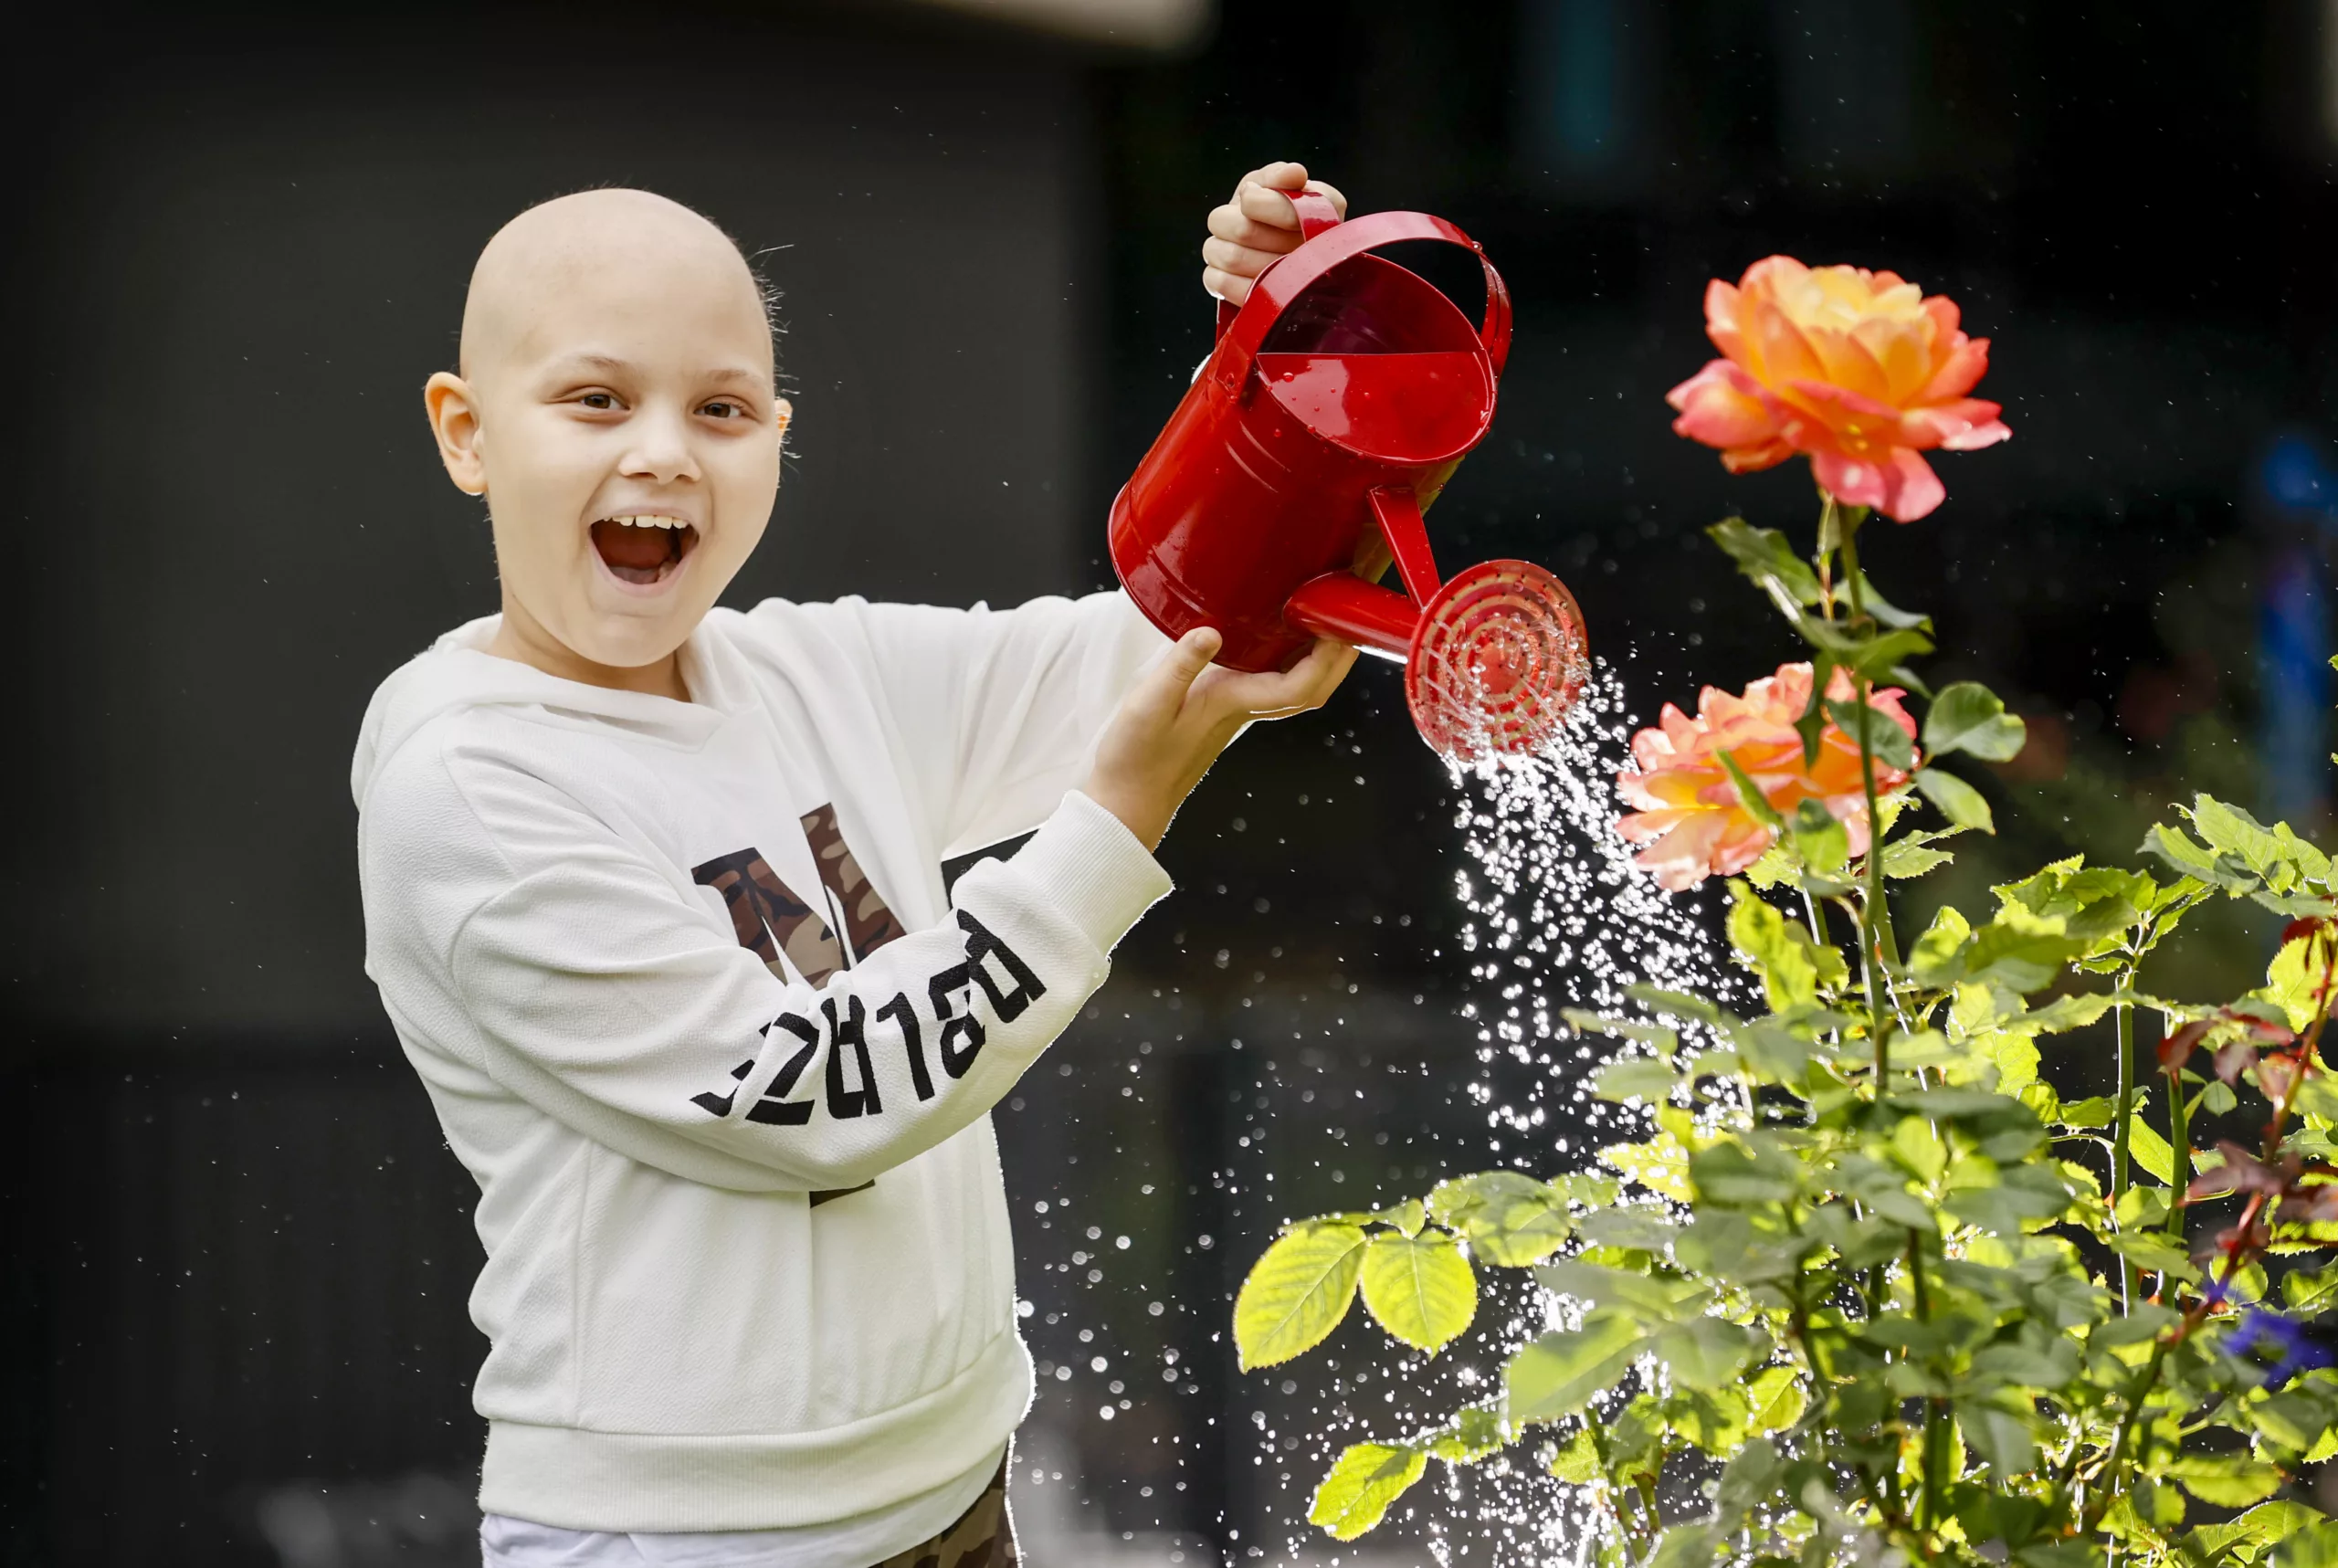 Patient with a red watering can, watering, gardening in the newly funded GARDEN PROGRAM VISION.